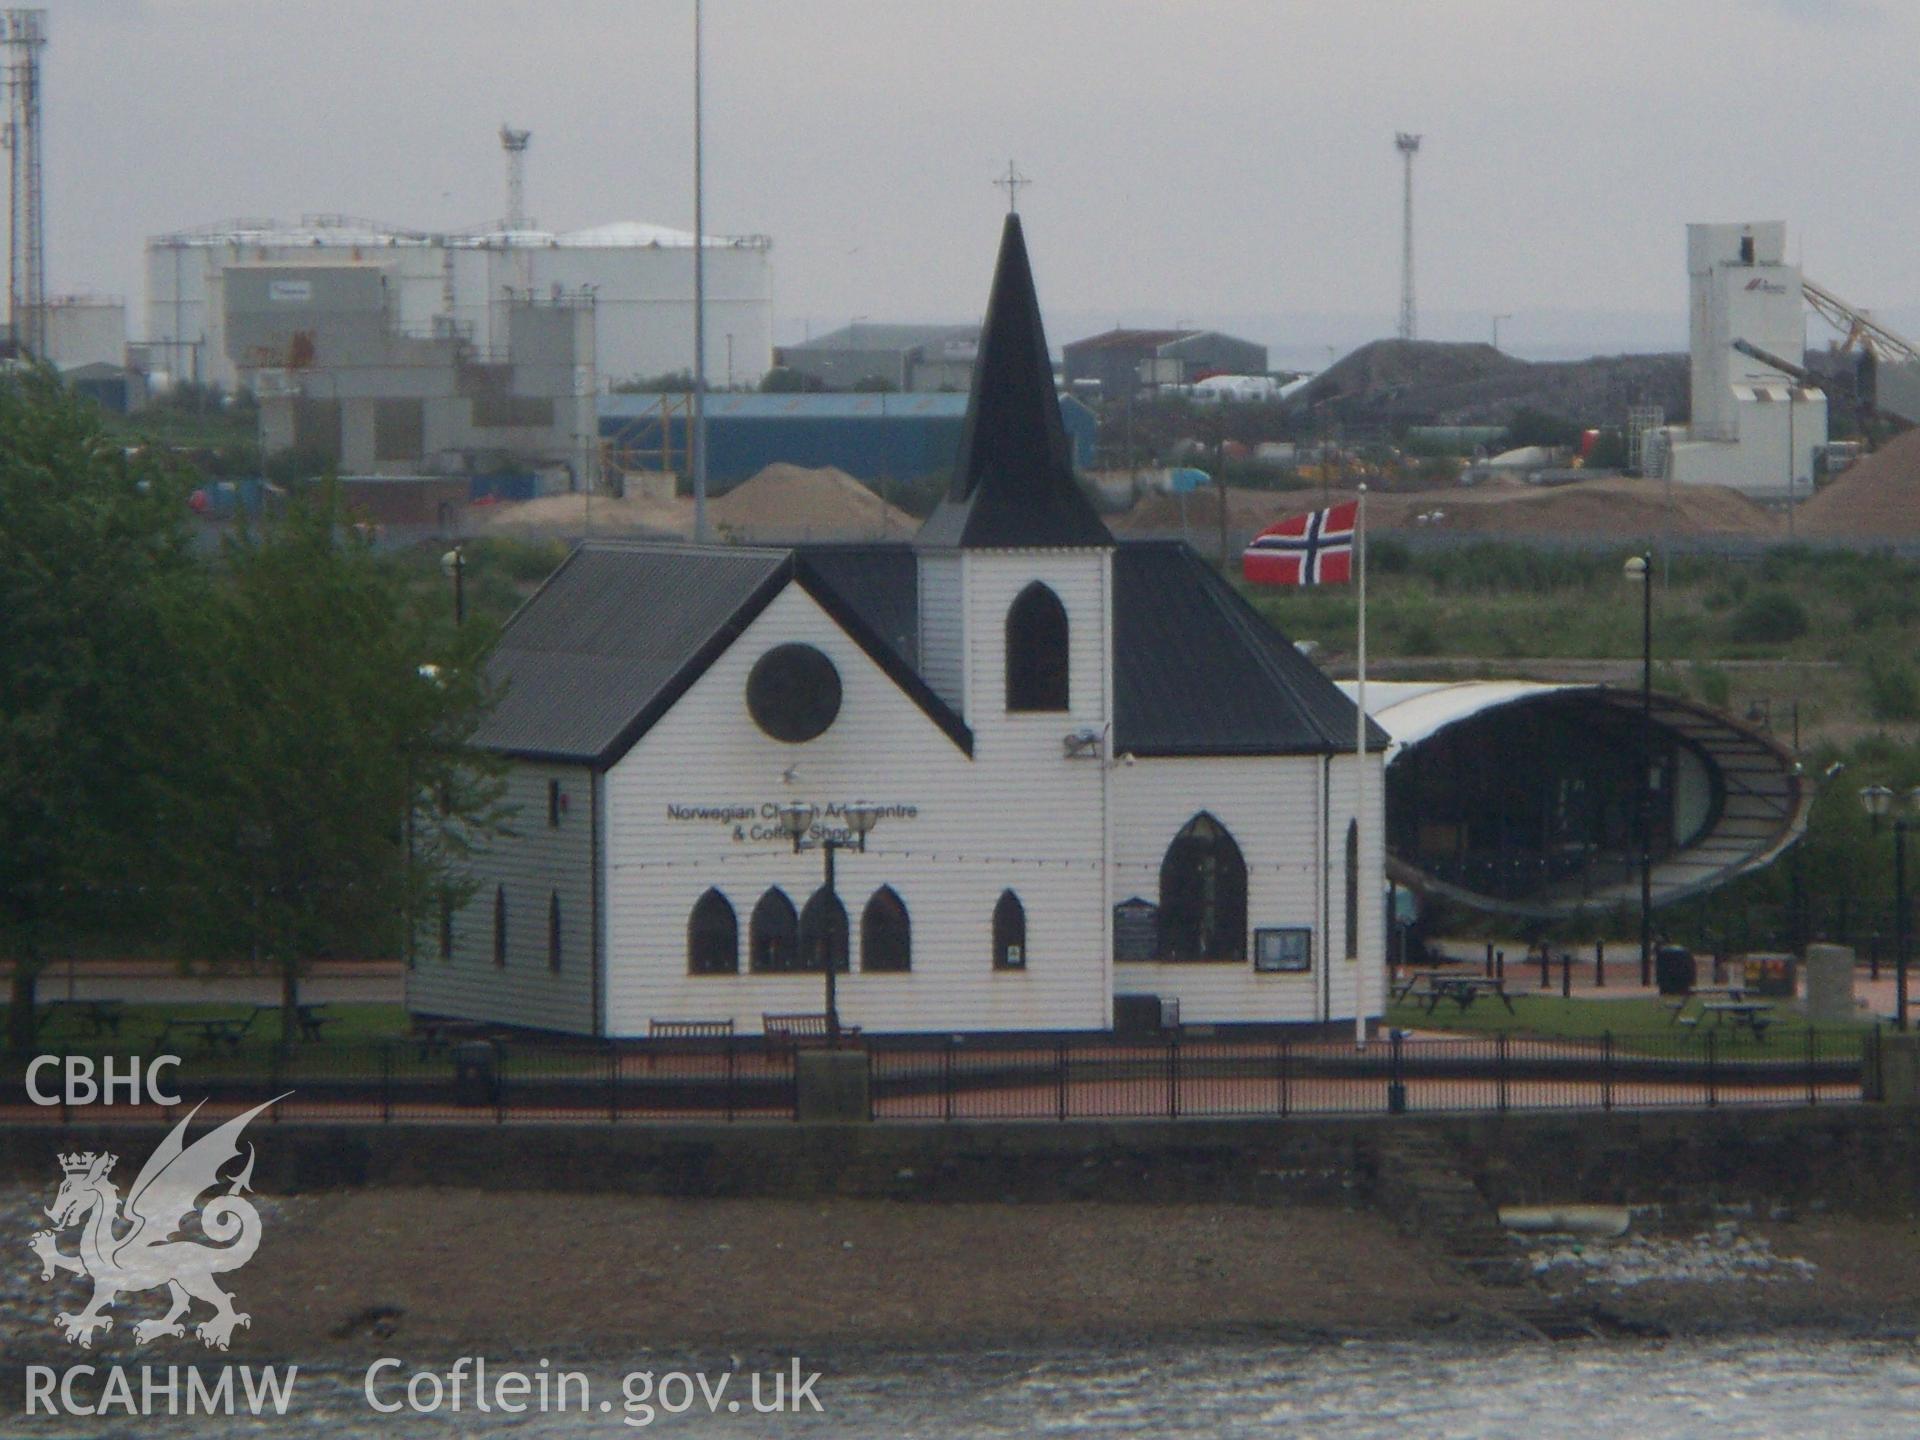 Norwegian church, Bute East Dock, Cardiff, built in 1869. Welsh ports had strong links with Norway, and many Norweigan sailors eventually settled in Wales - including the father of the author Roald Dahl.